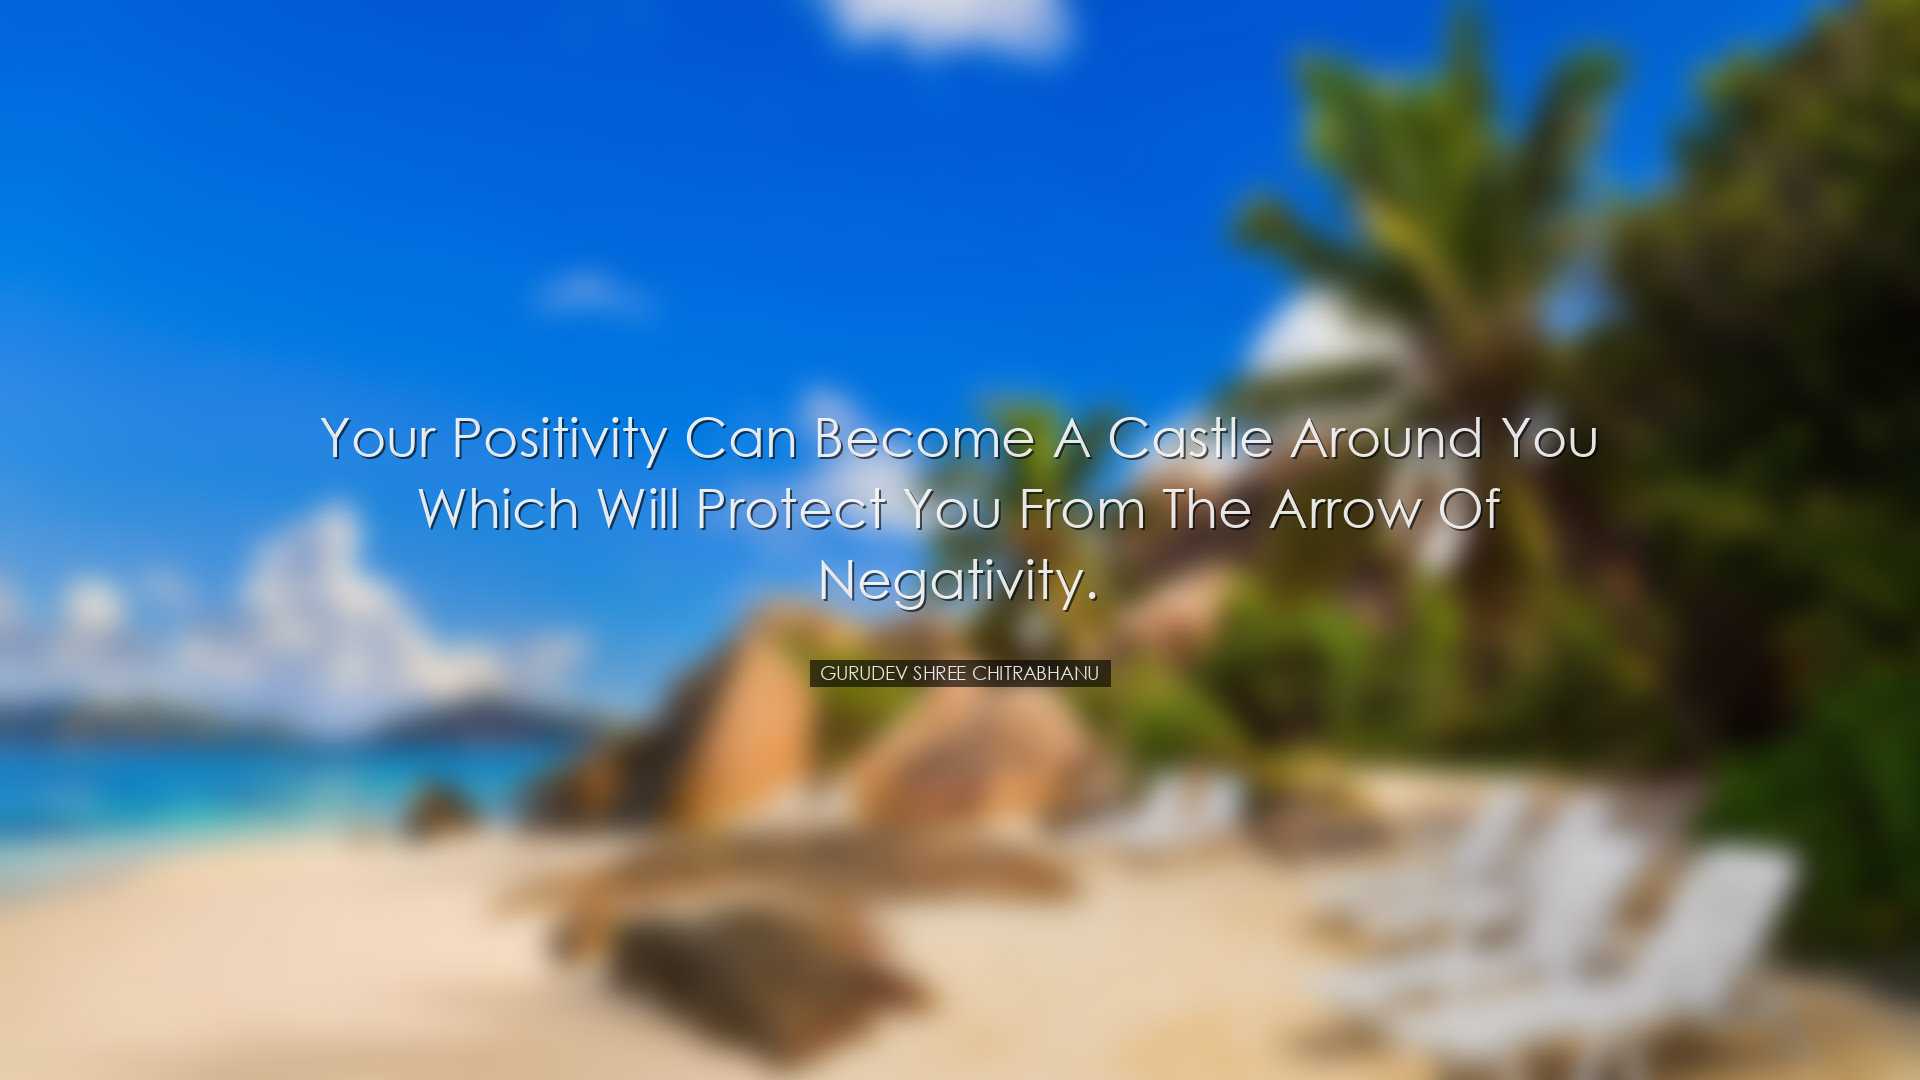 Your positivity can become a castle around you which will protect